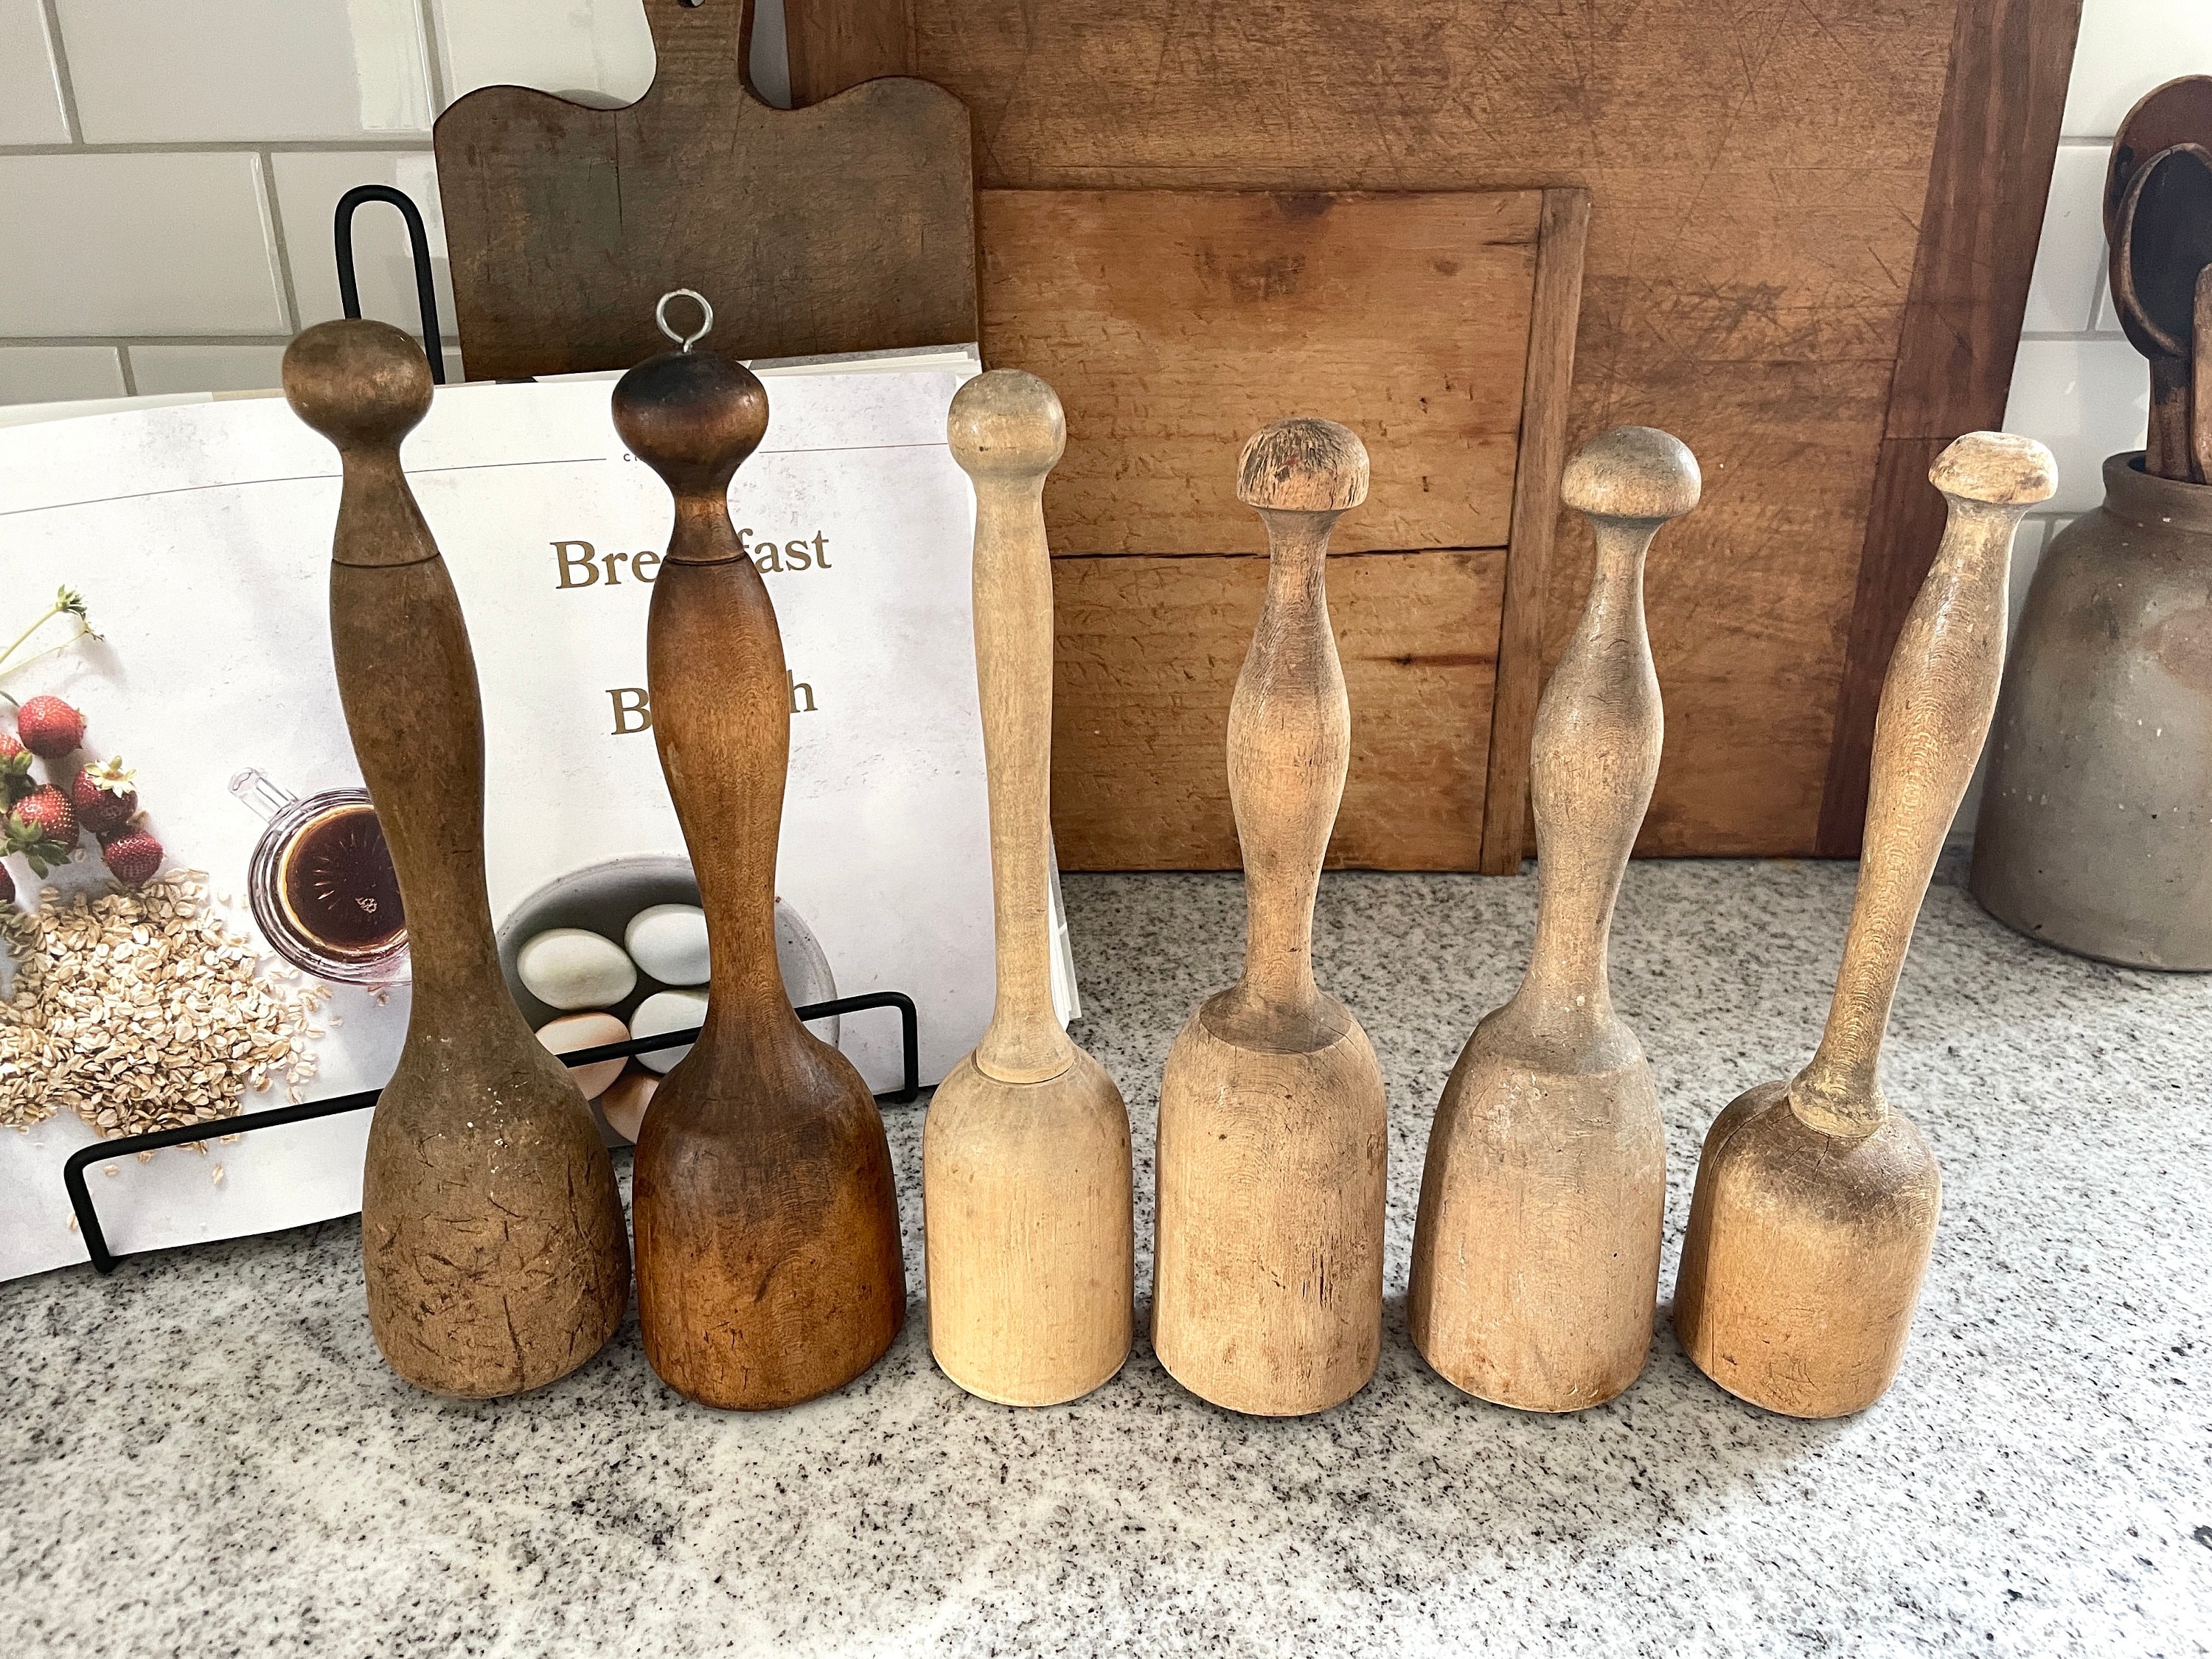 Wooden Hand Masher from France